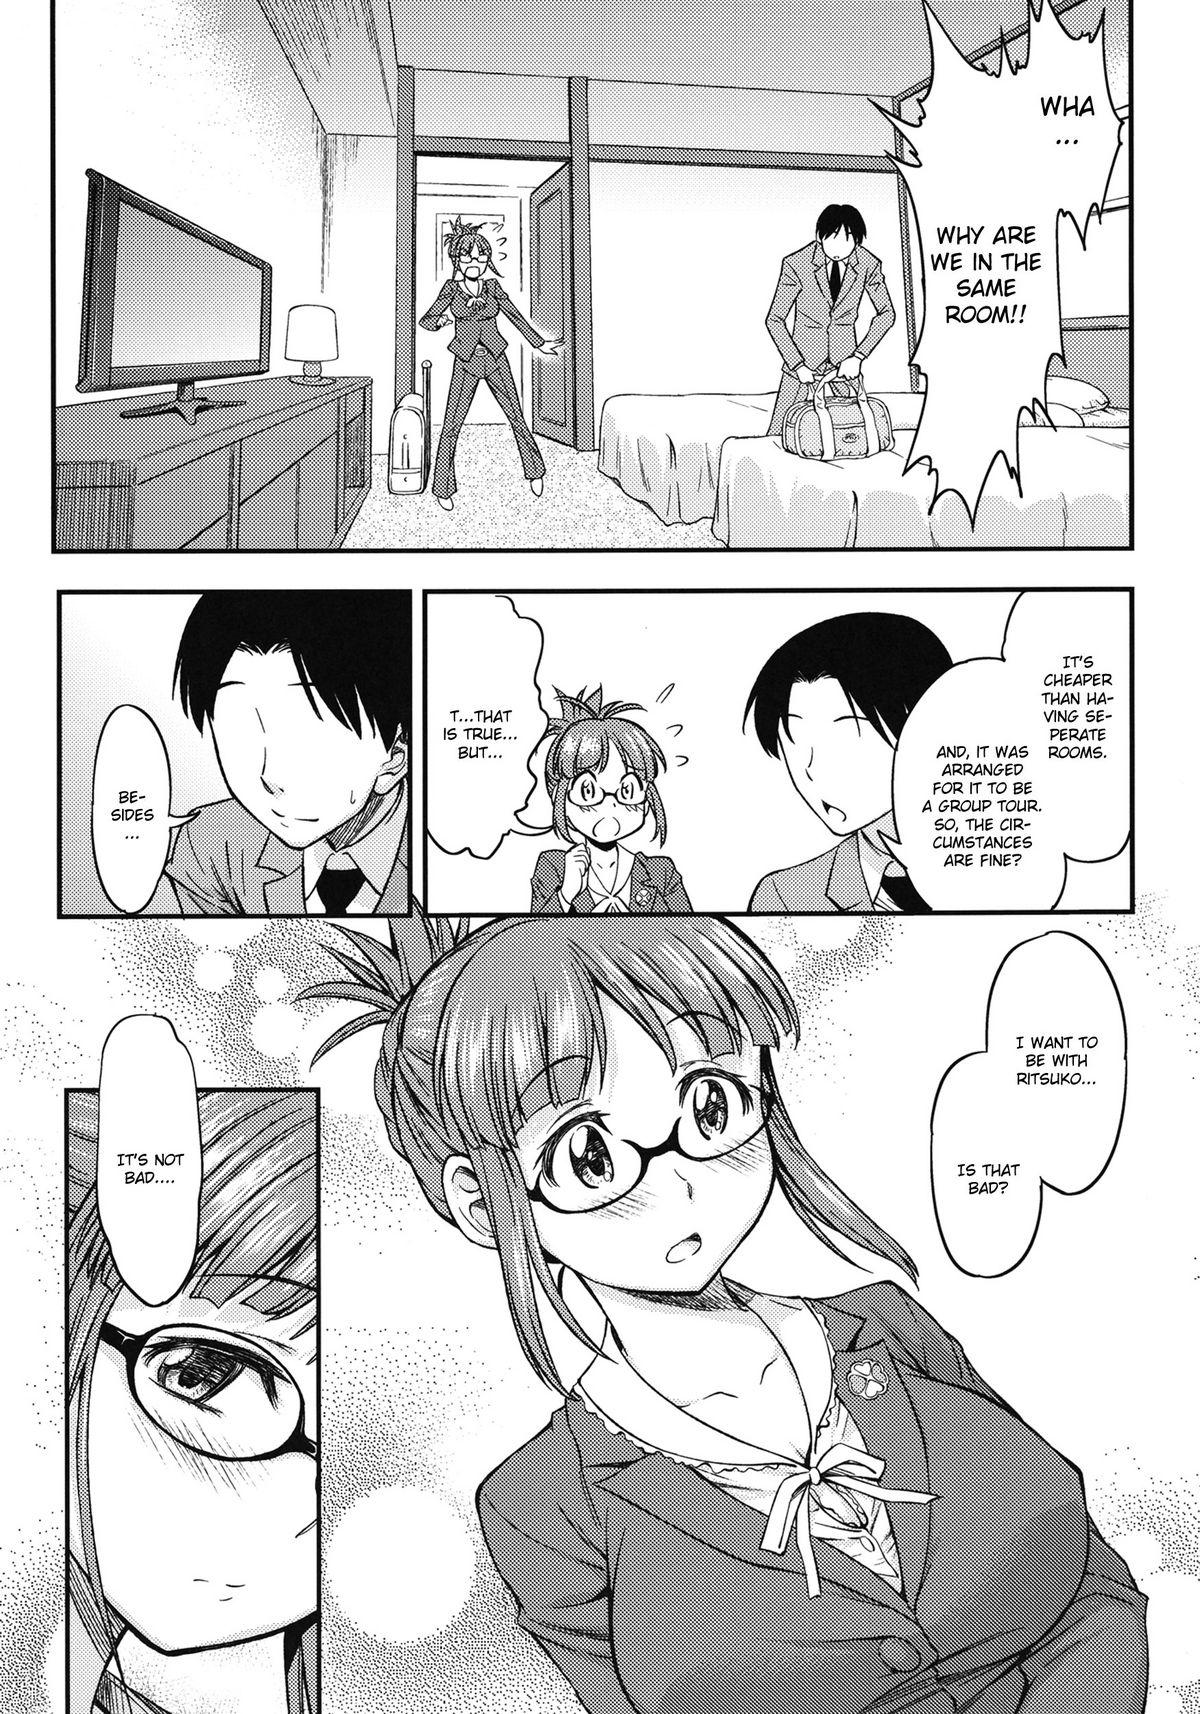 Gay Shaved MAGIC OF LOVE - The idolmaster Reversecowgirl - Page 2